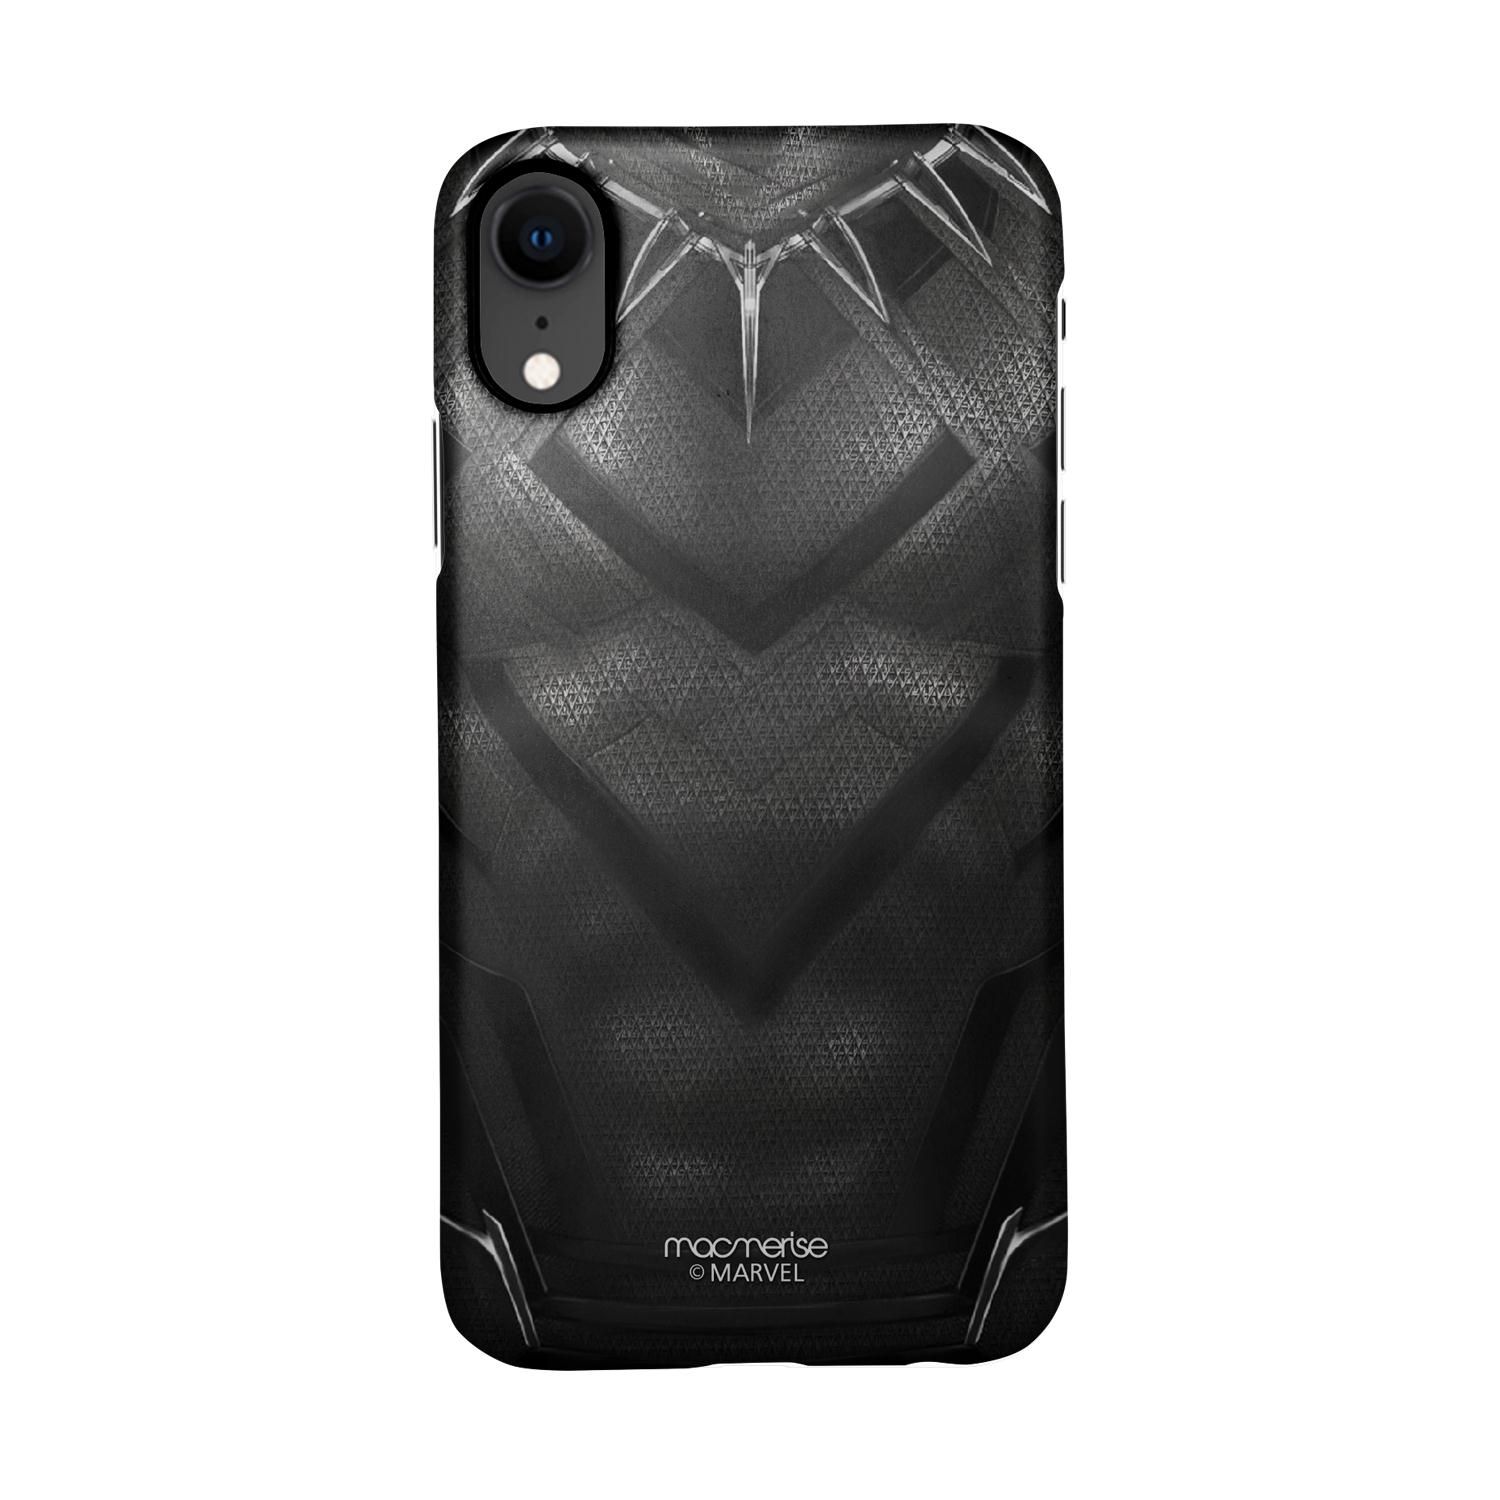 Suit up Black Panther - Sleek Phone Case for iPhone XR